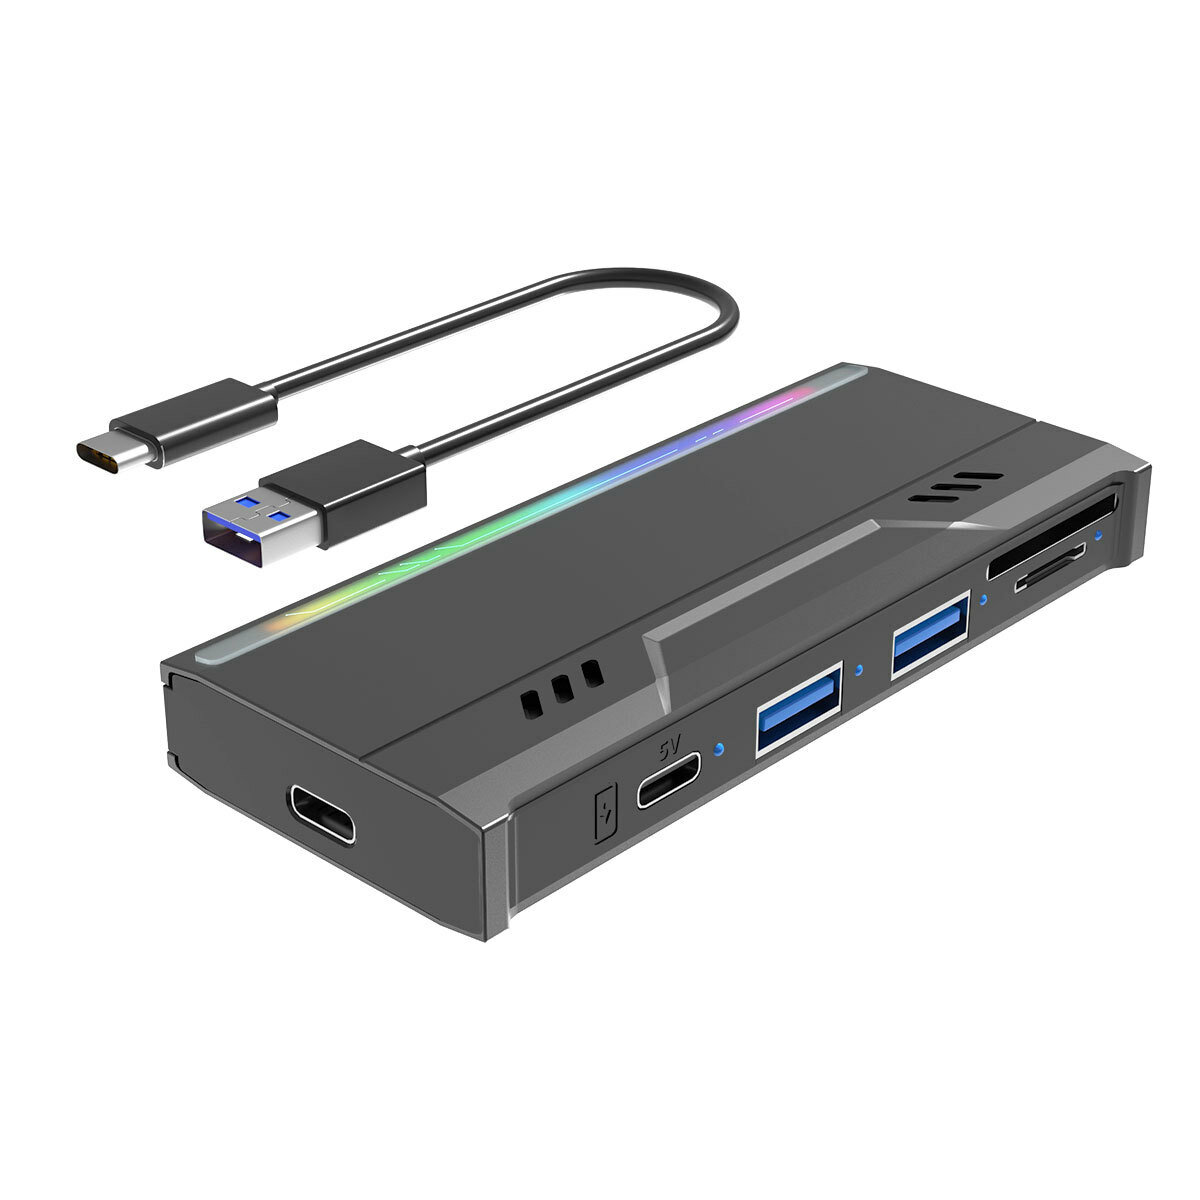 

Bakeey S19 M.2 NVME/NGFF SSD Enclosure 10Gbps External Hard Drive USB3.1 Type-C Hub Support 6TB Capacity for M.2 SSD 223